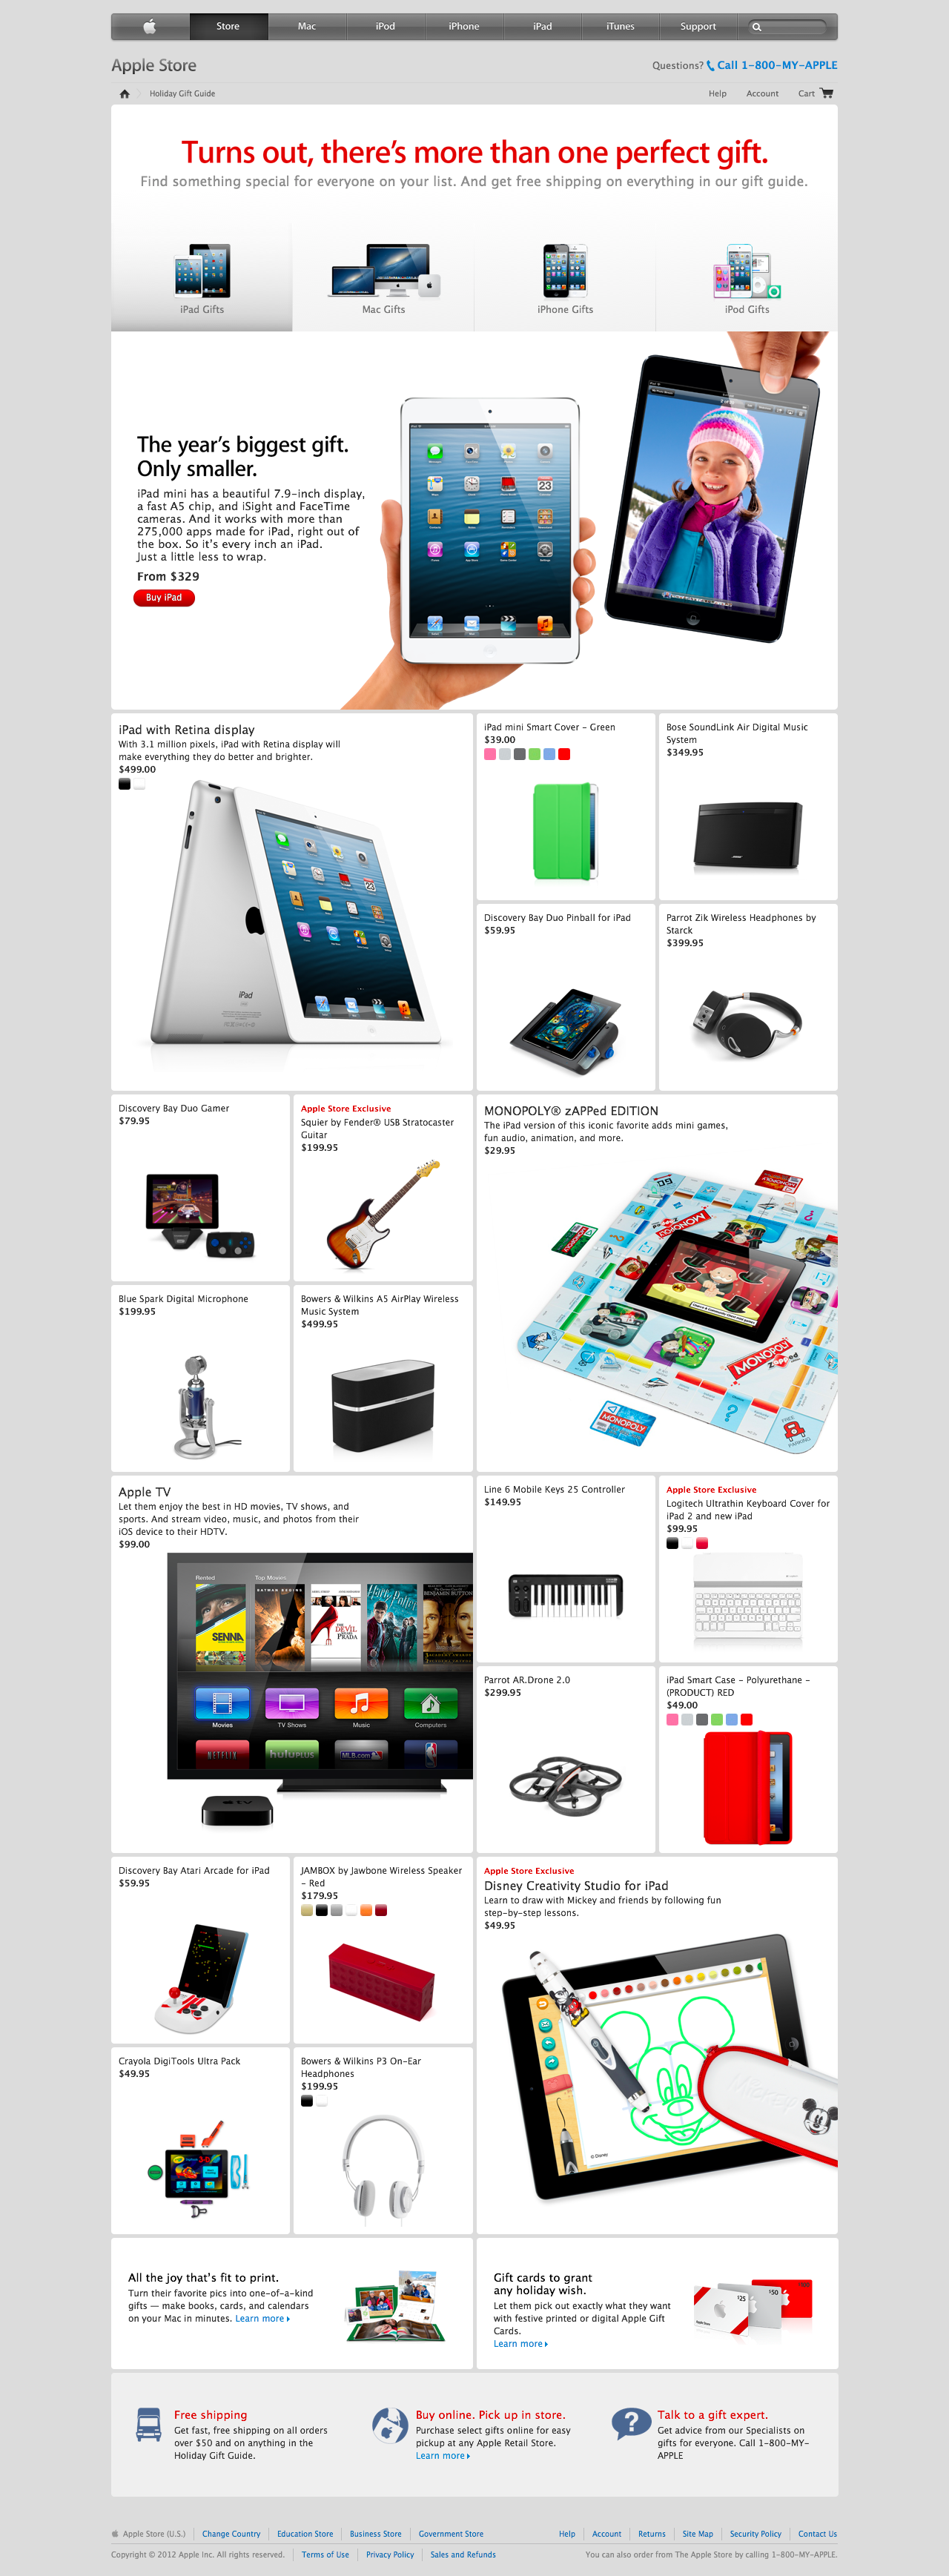 Apple Posts 2012 Holiday Gift Guide